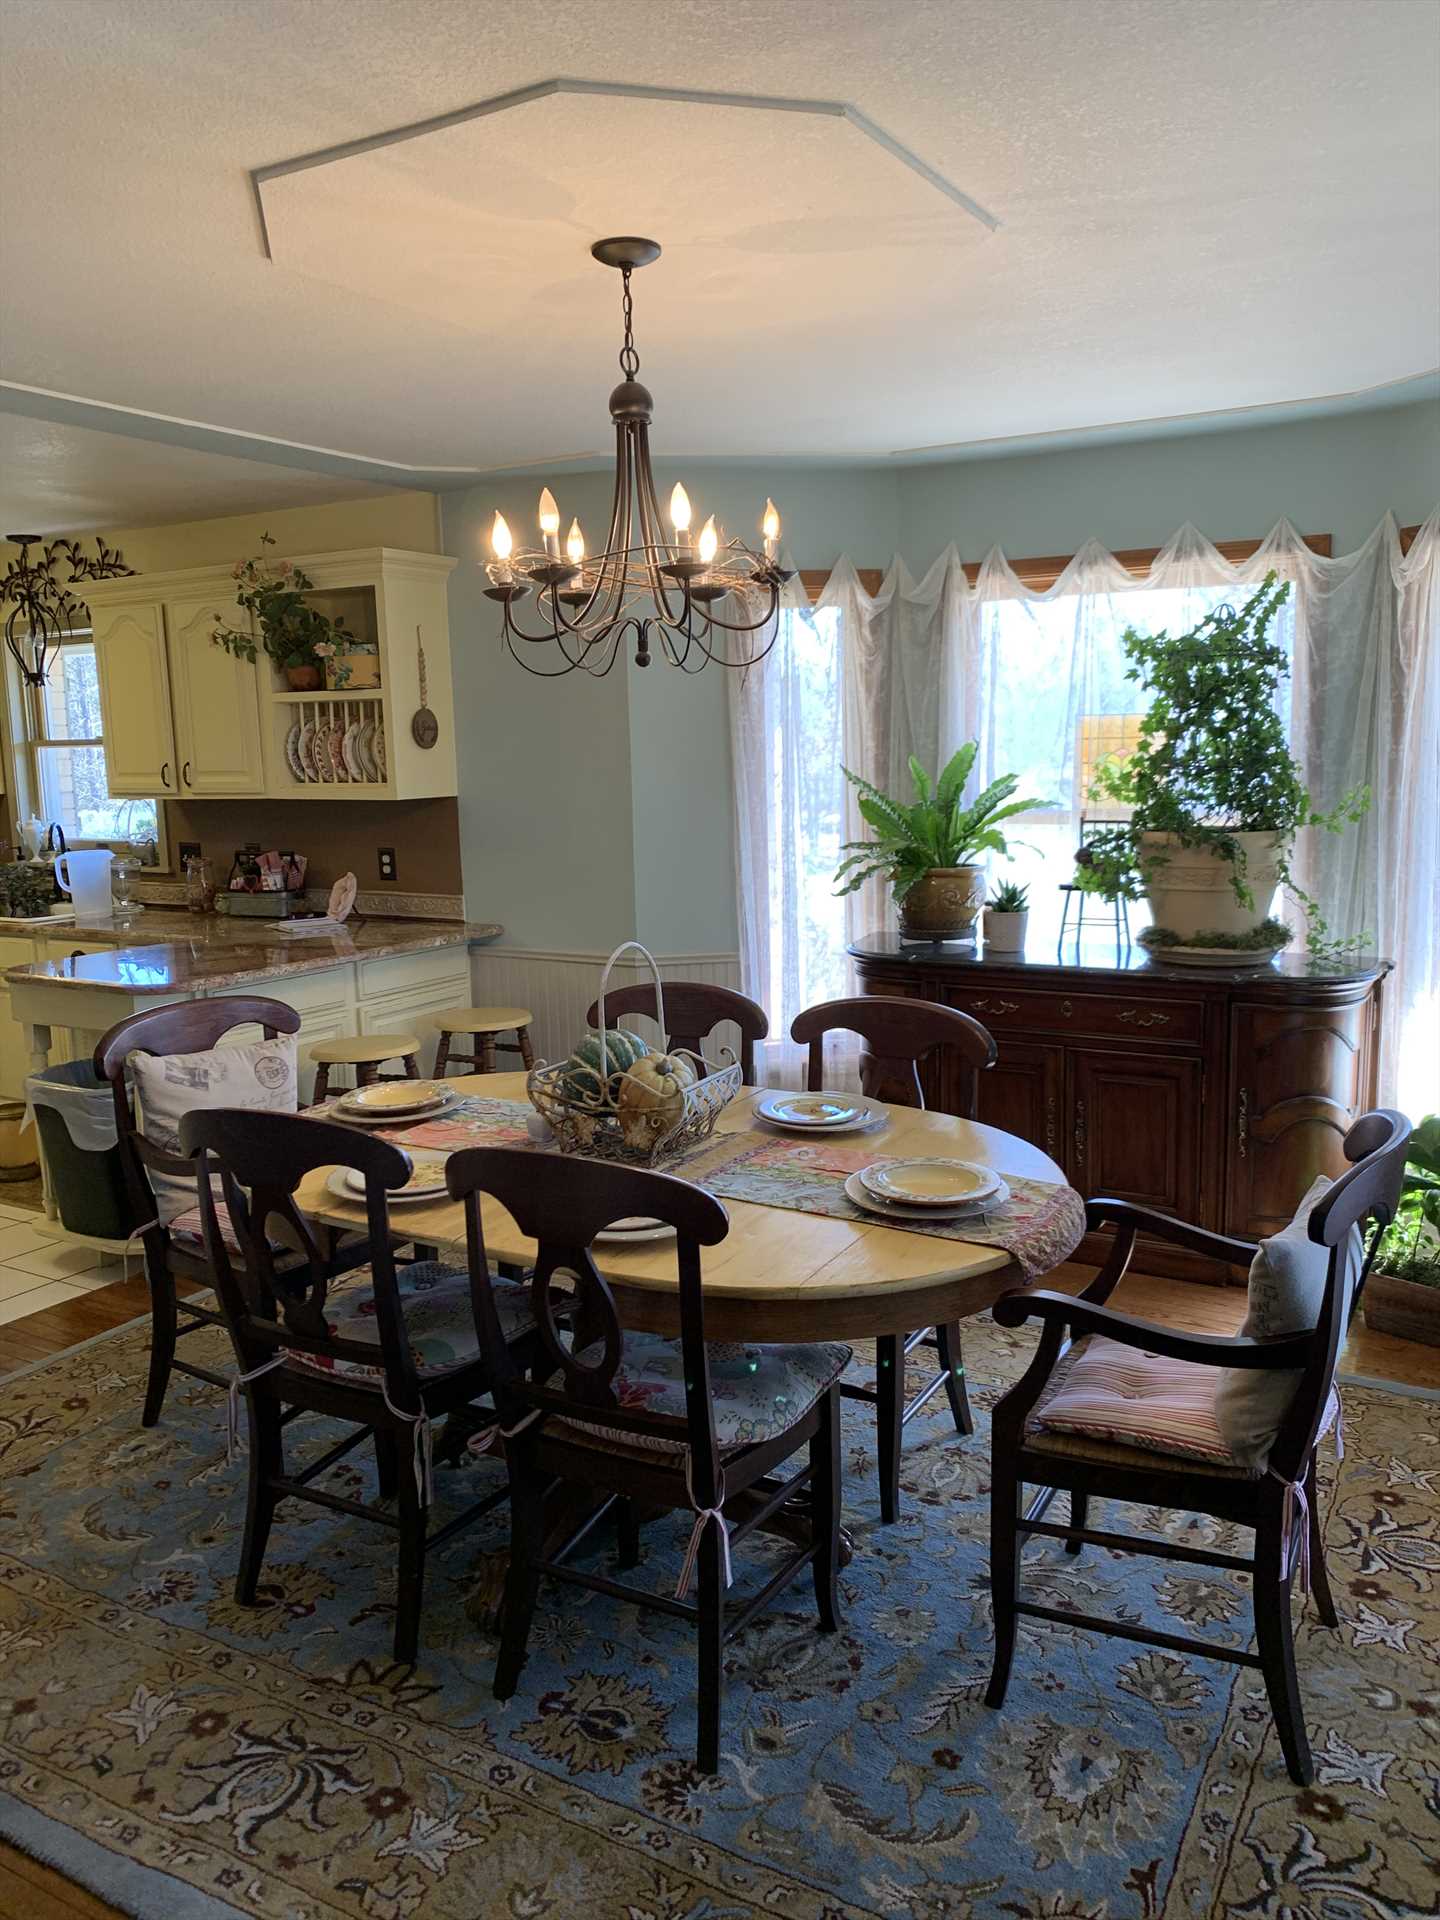                                                 Elegant touches in the dining room make even the most casual meal a special experience.